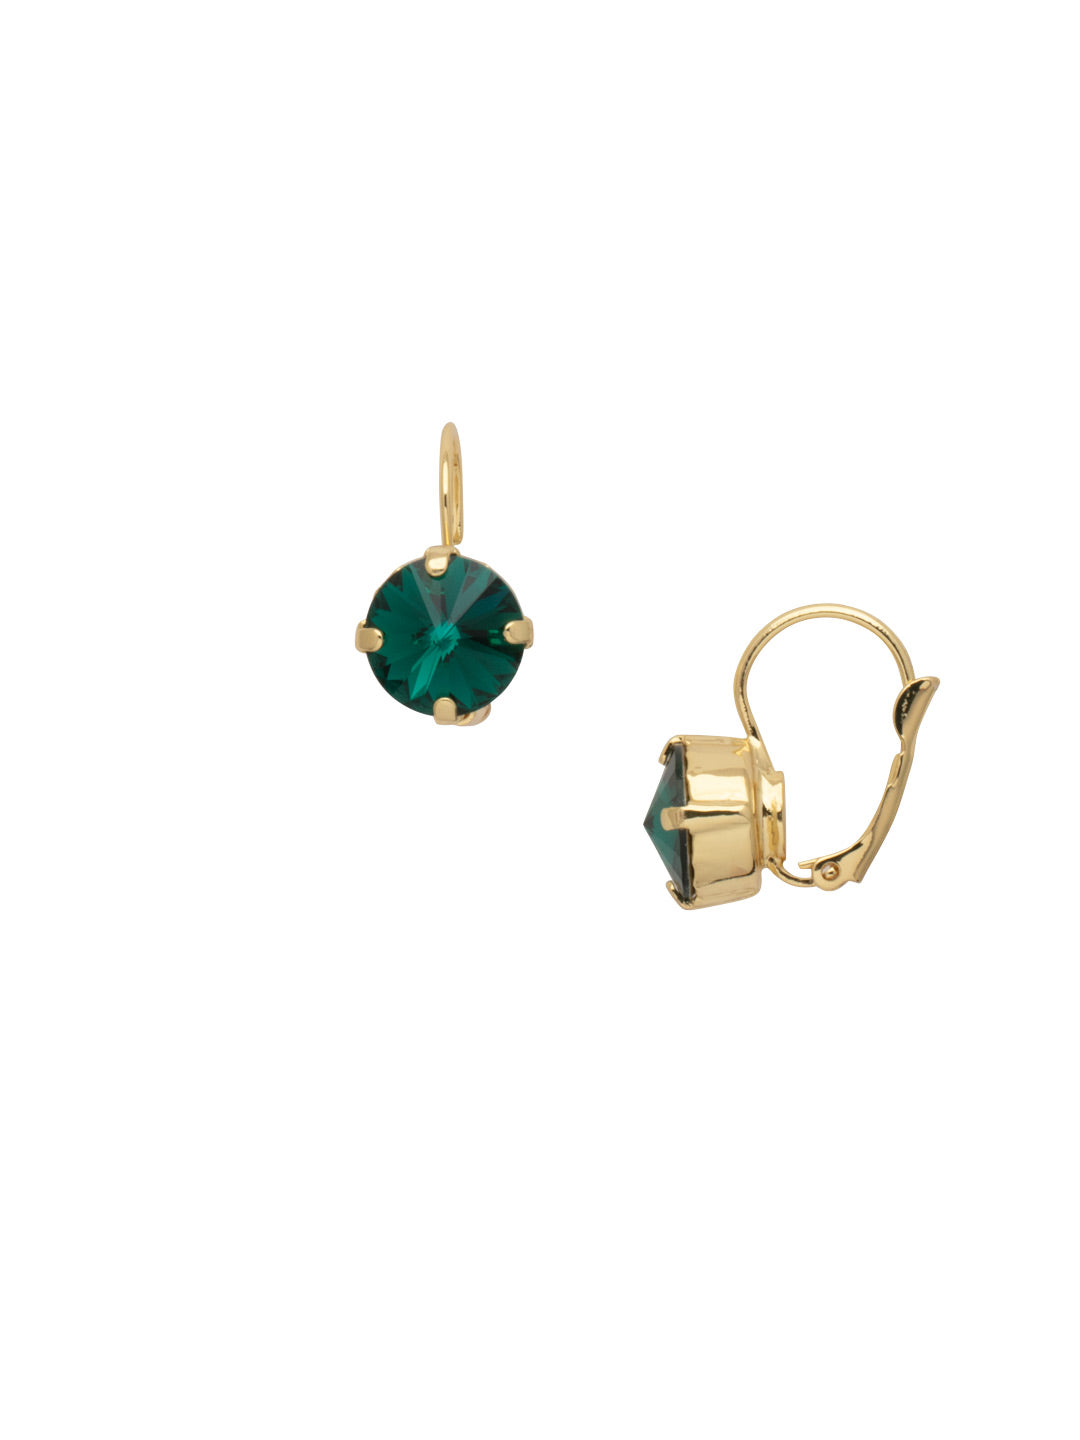 Mara Dangle Earrings - EET60BGMDG - <p>Add just a touch of sparkle and shine to any outfit with the Mara Dangle Earrings. They're classics. From Sorrelli's Mardi Gras collection in our Bright Gold-tone finish.</p>